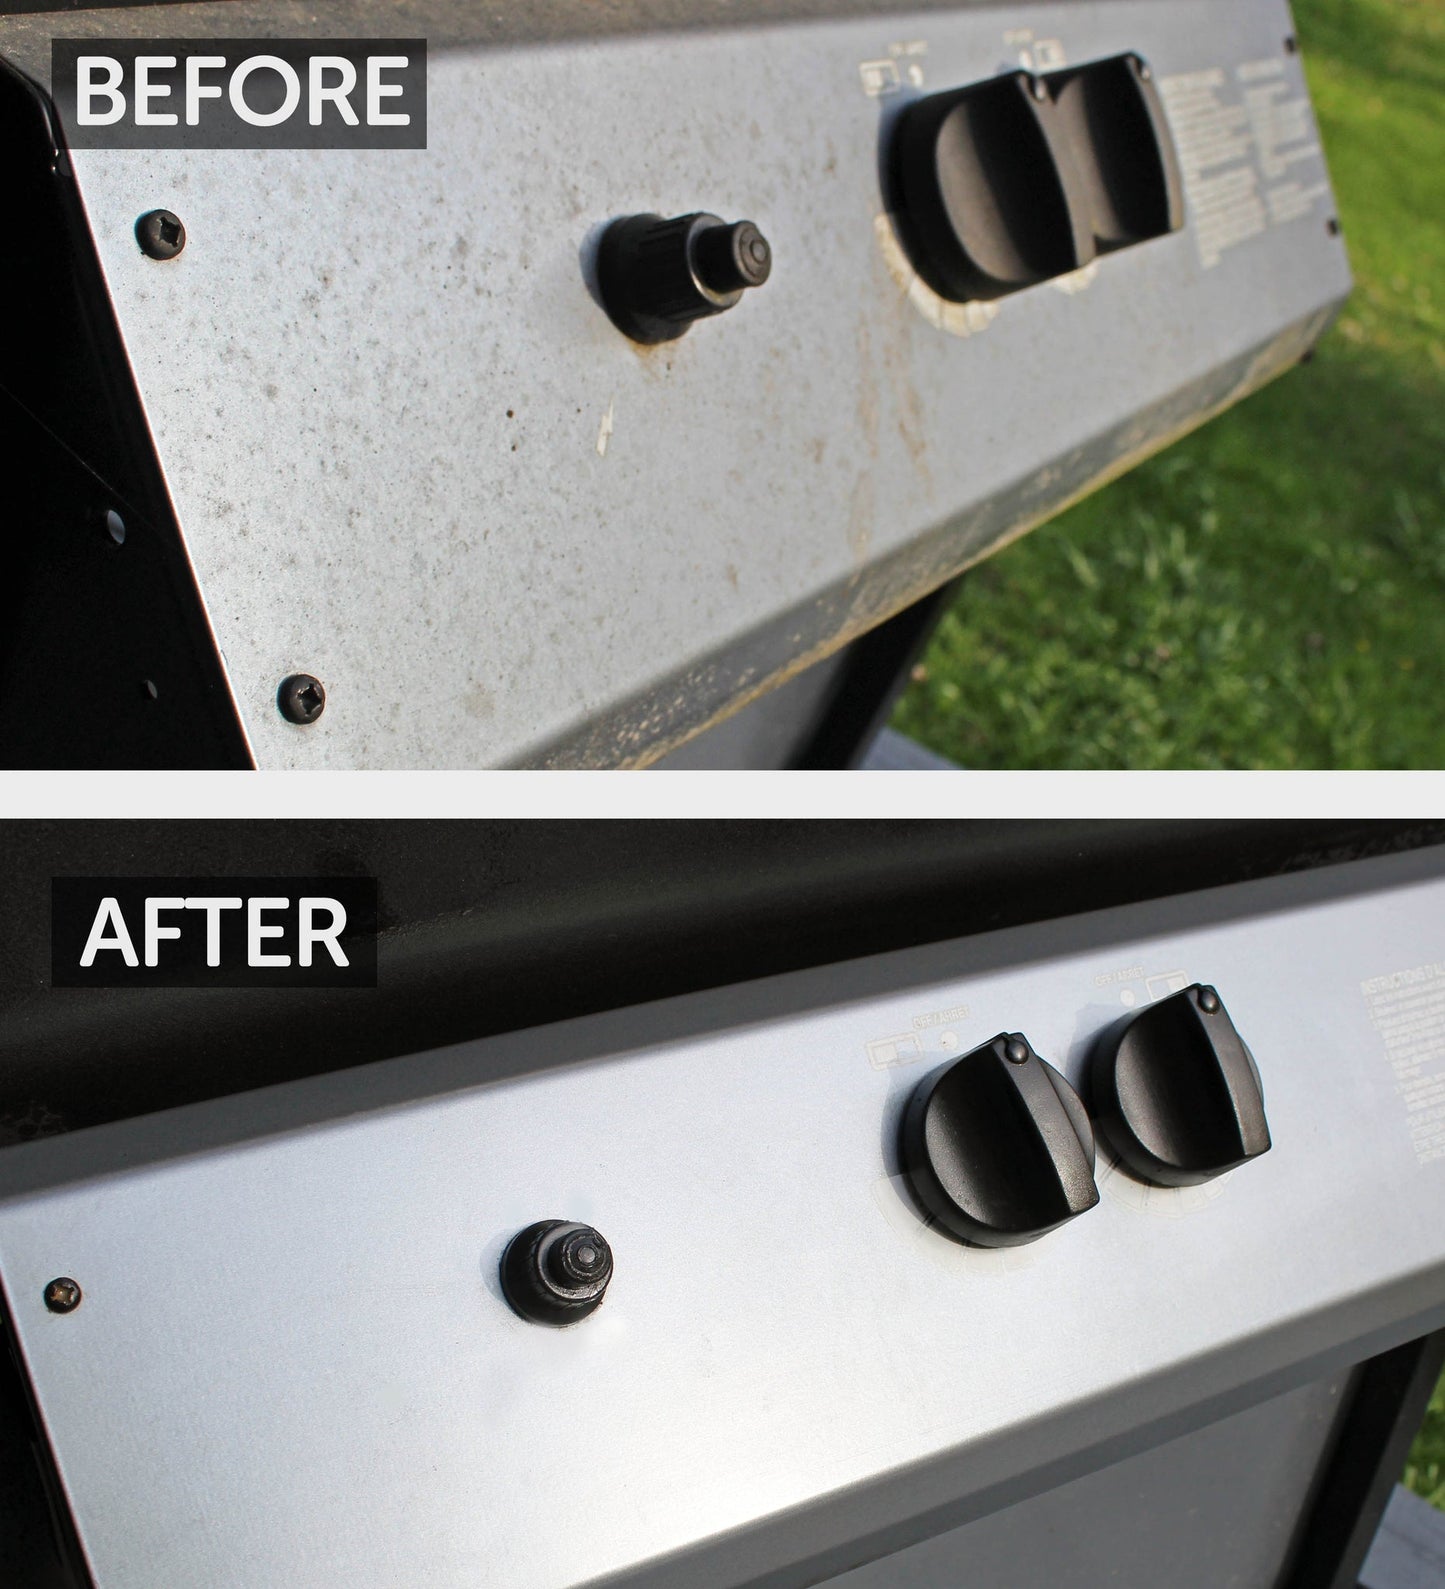 bbq grill illustrating before and after shots of using the cleaning oil